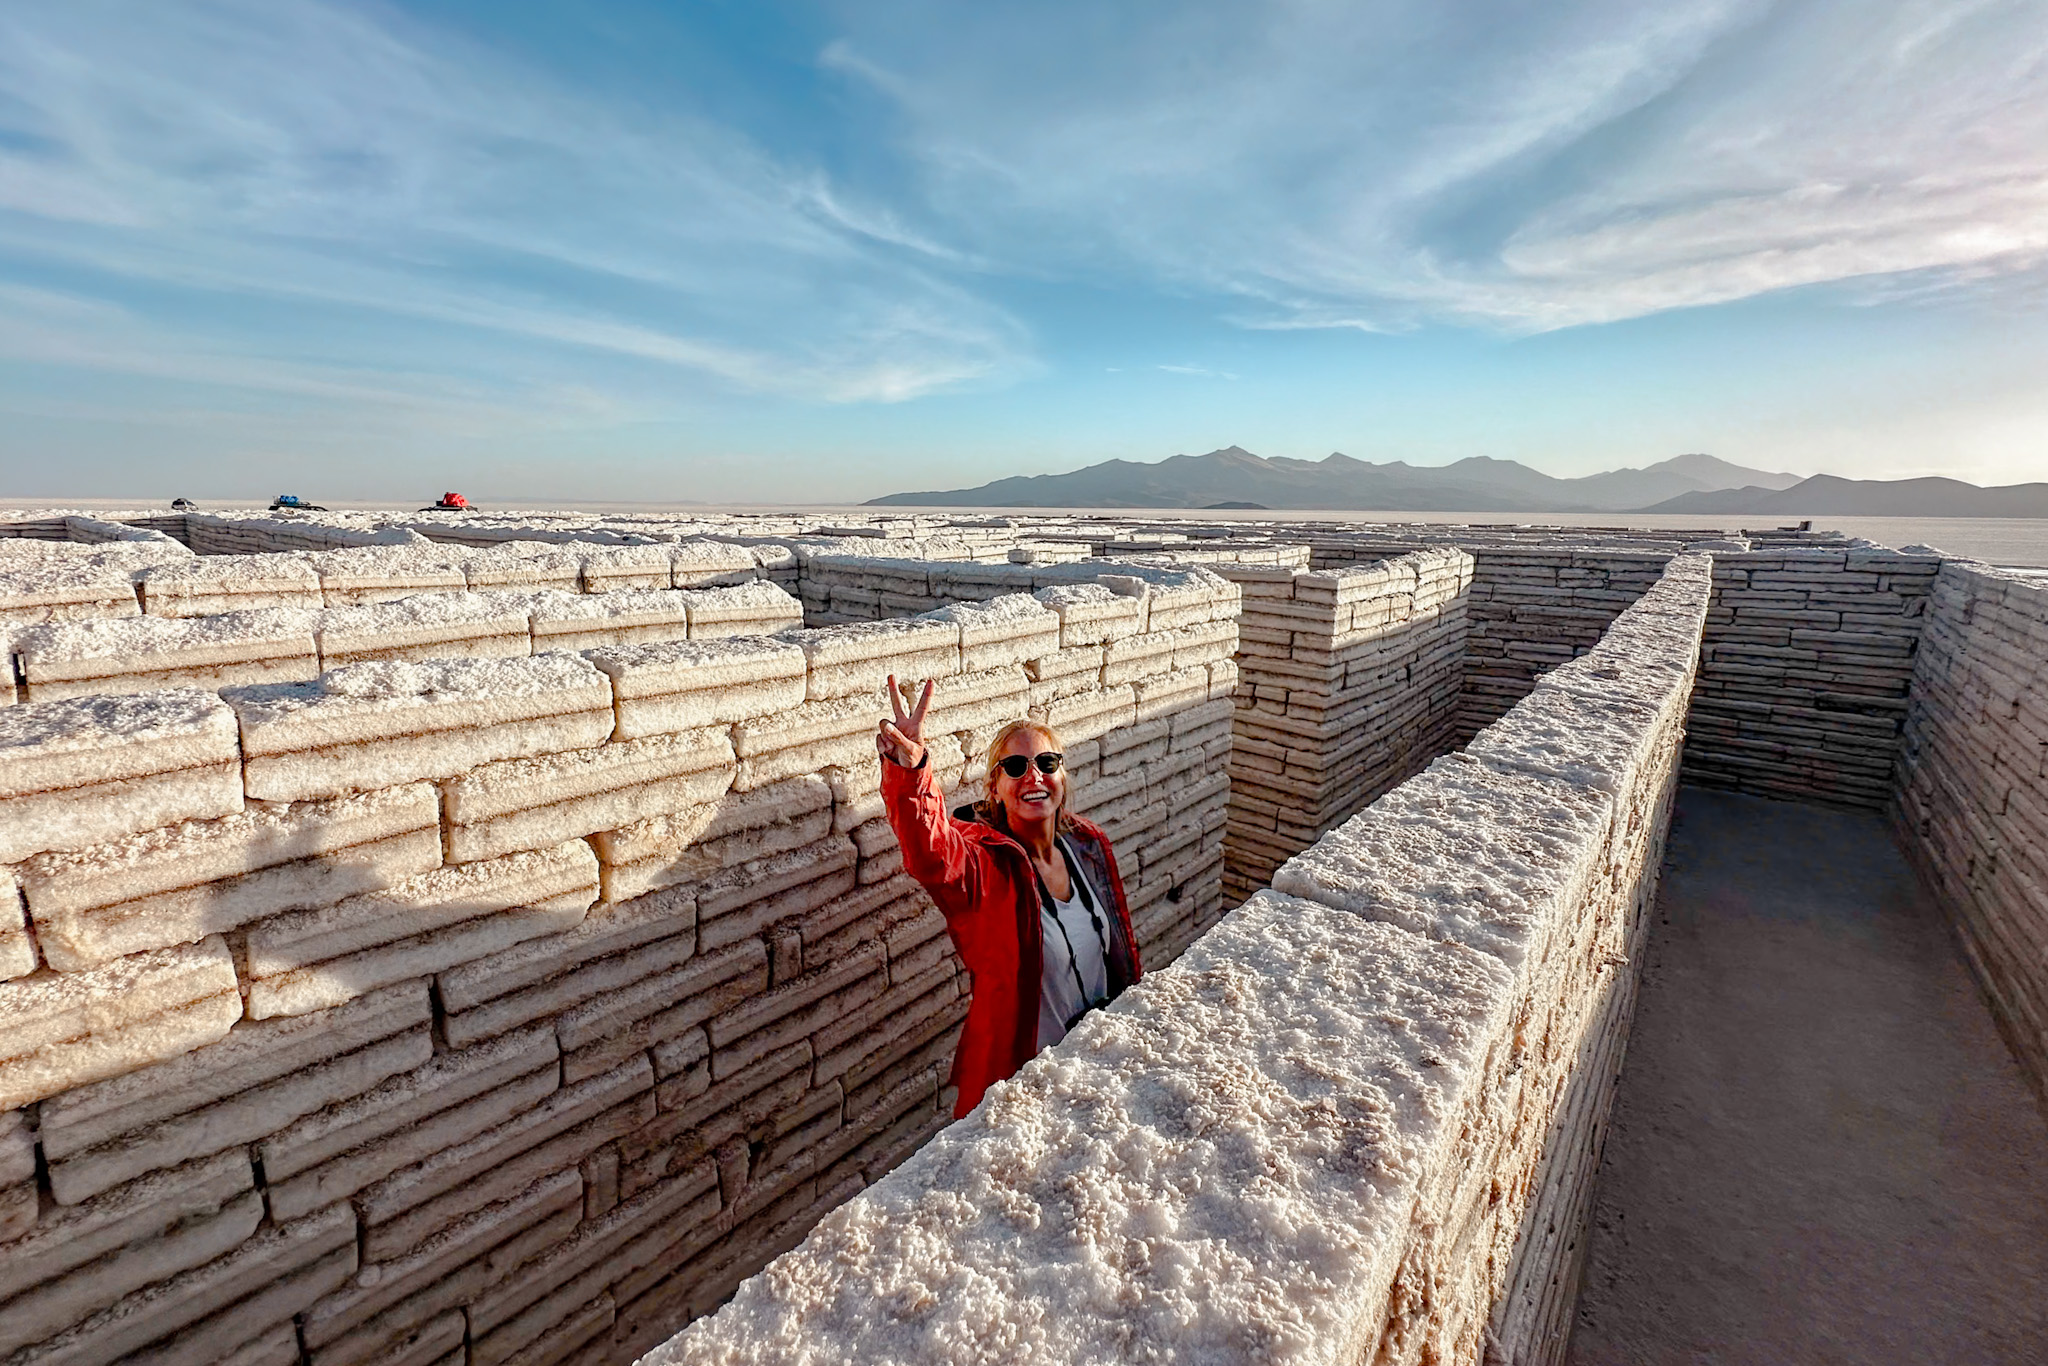 Uyuni Travel Guide: Finding our way out in the Salt Labyrinth in Salar de Uyuni